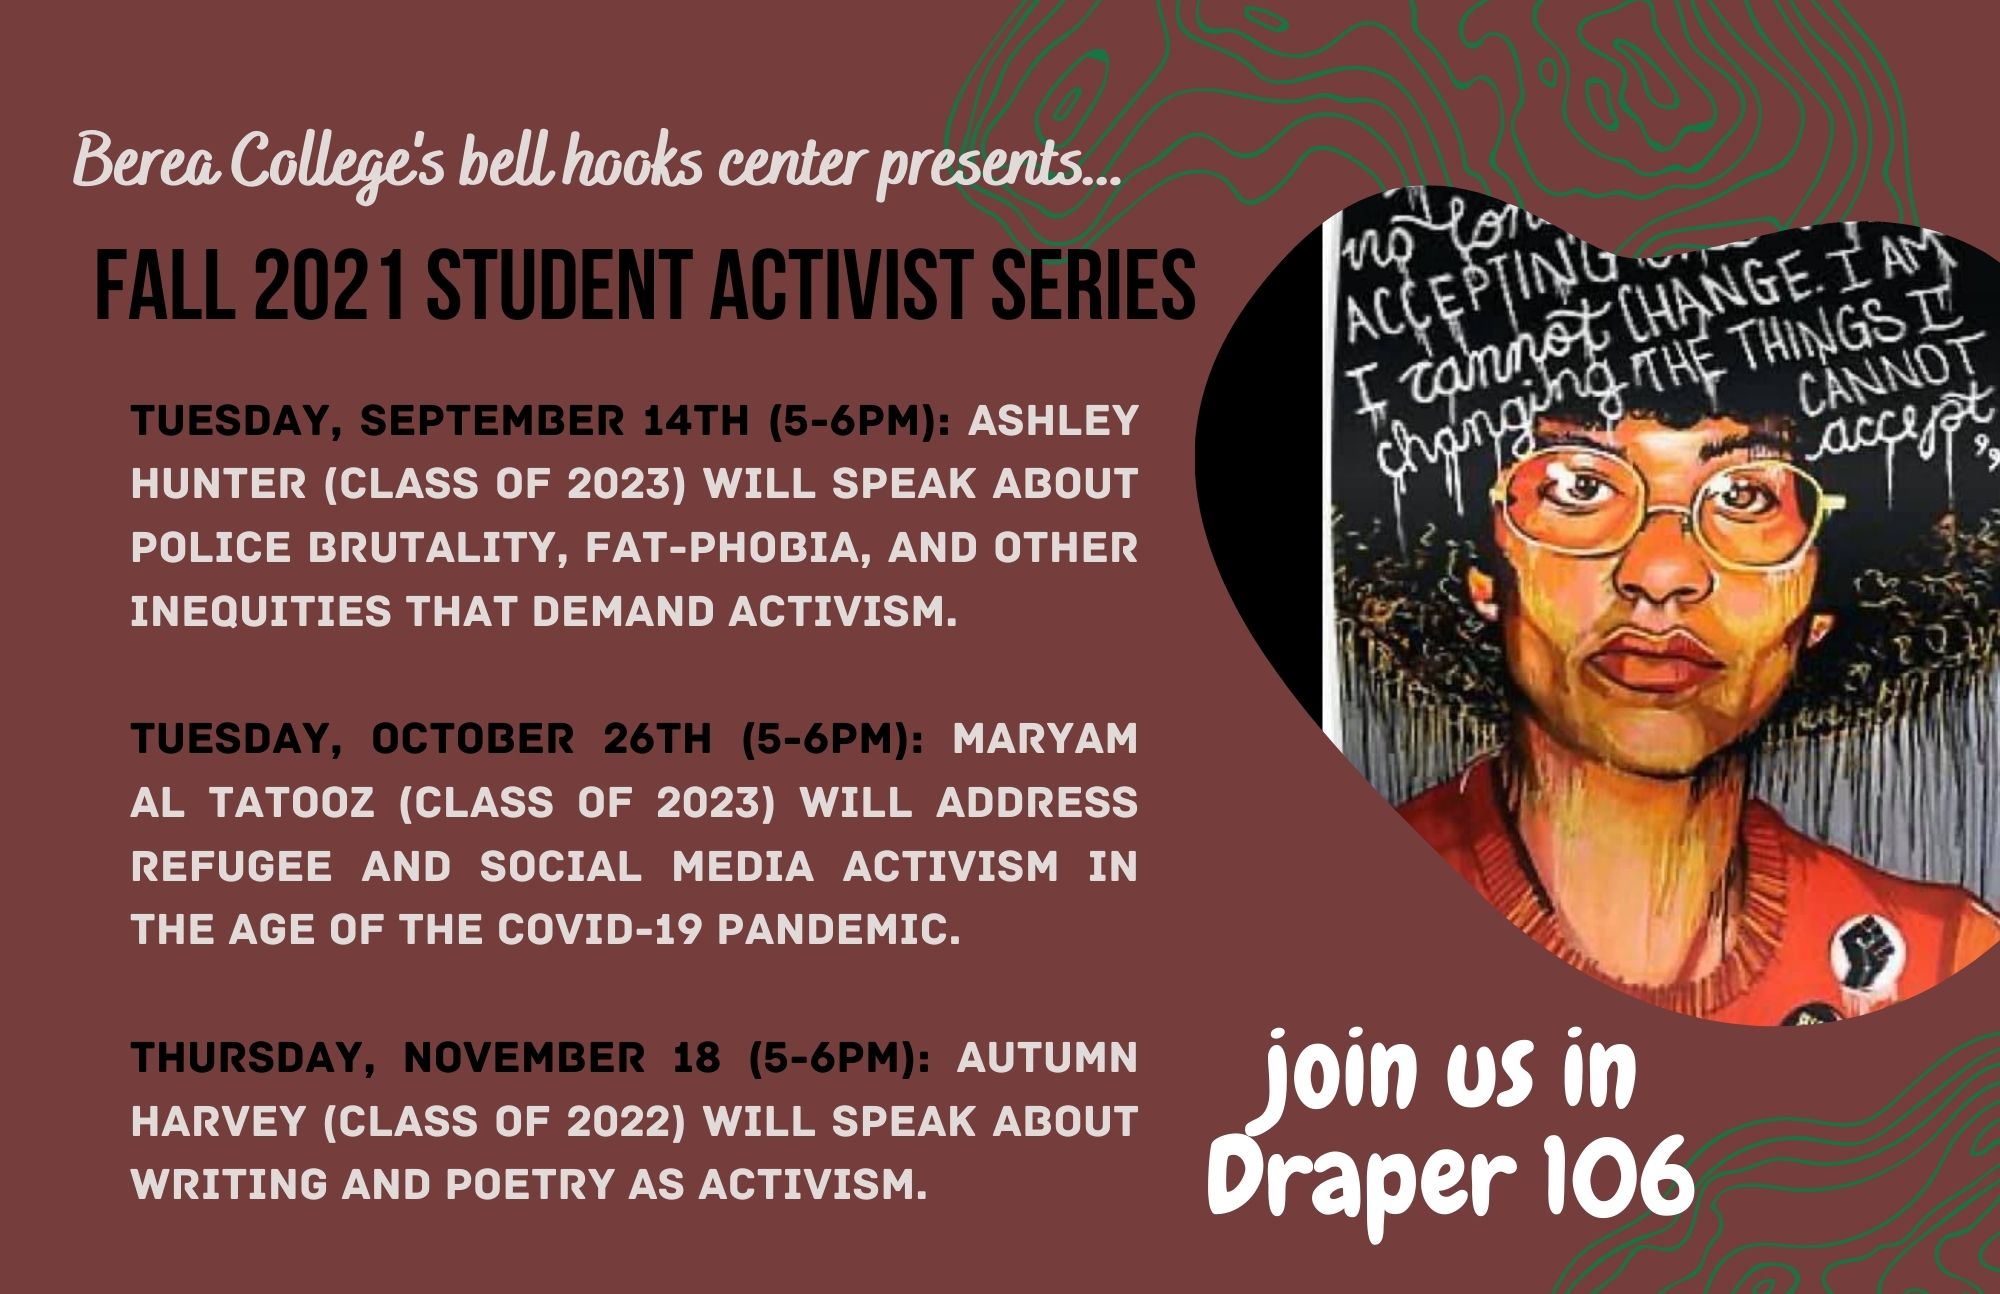 Fall 2021 Student Activist Series Poster